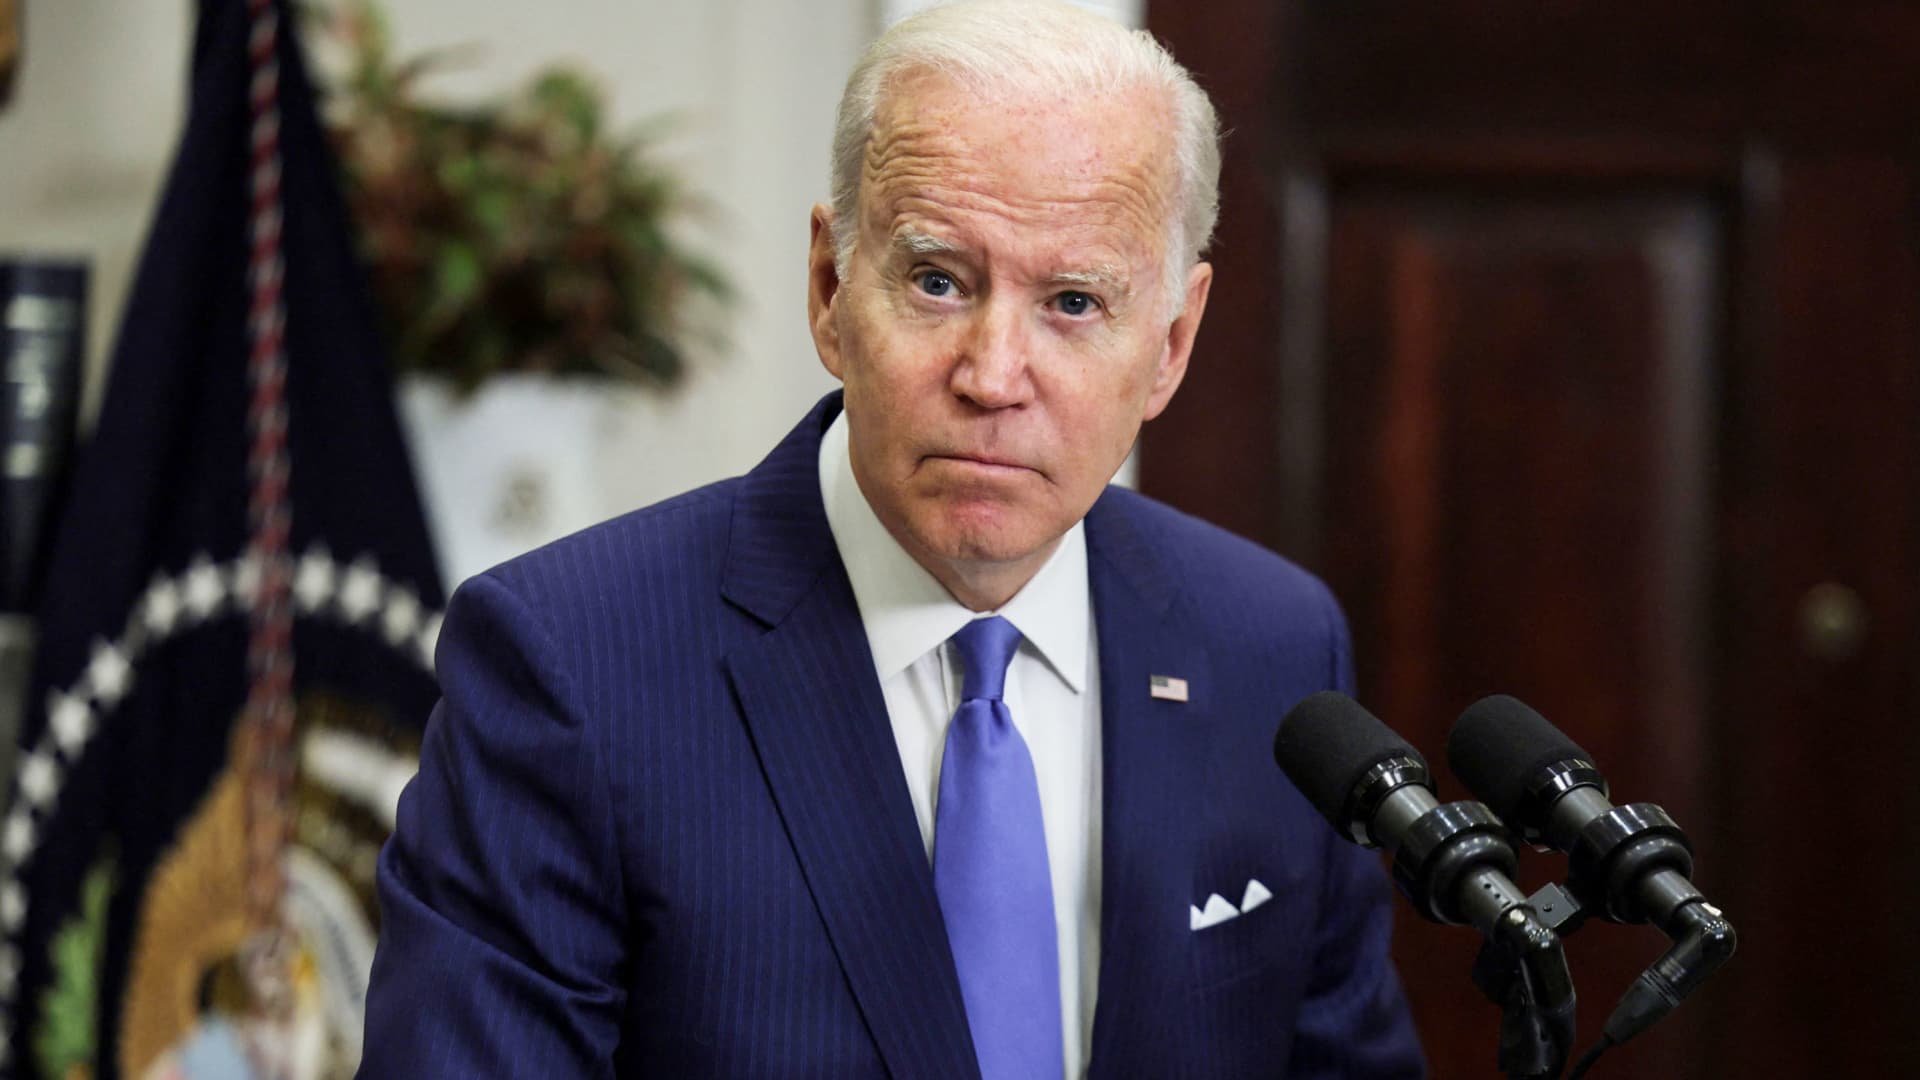 Biden says he’s not considering $50000 in student loan forgiveness – CNBC